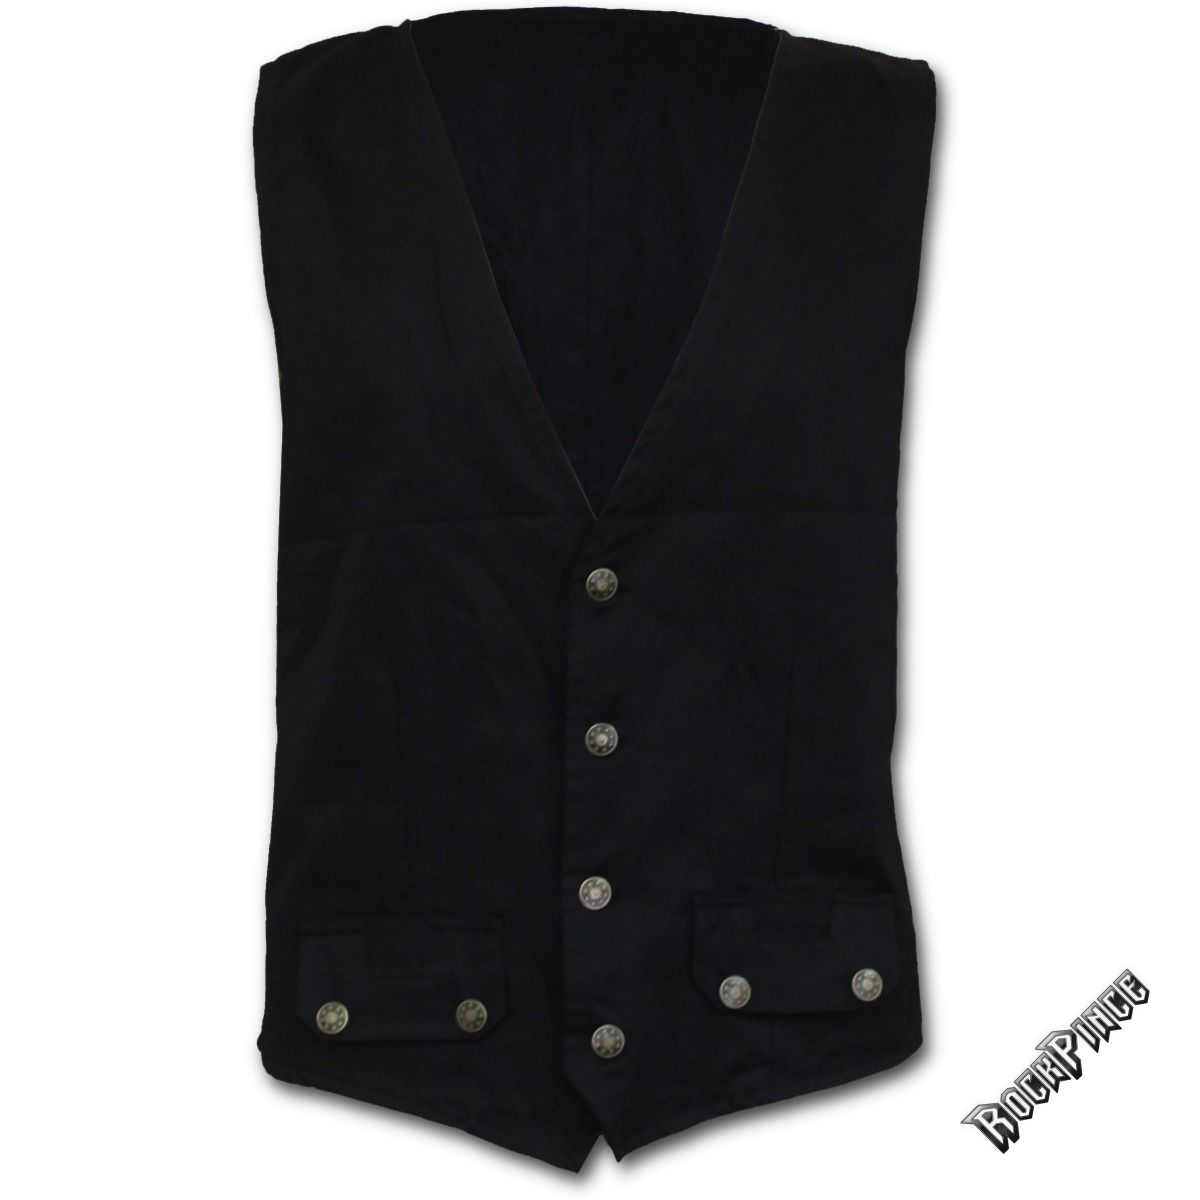 GOTHIC ROCK - Gothic Waistcoat Four Button with Lining (Plain) - P002M656